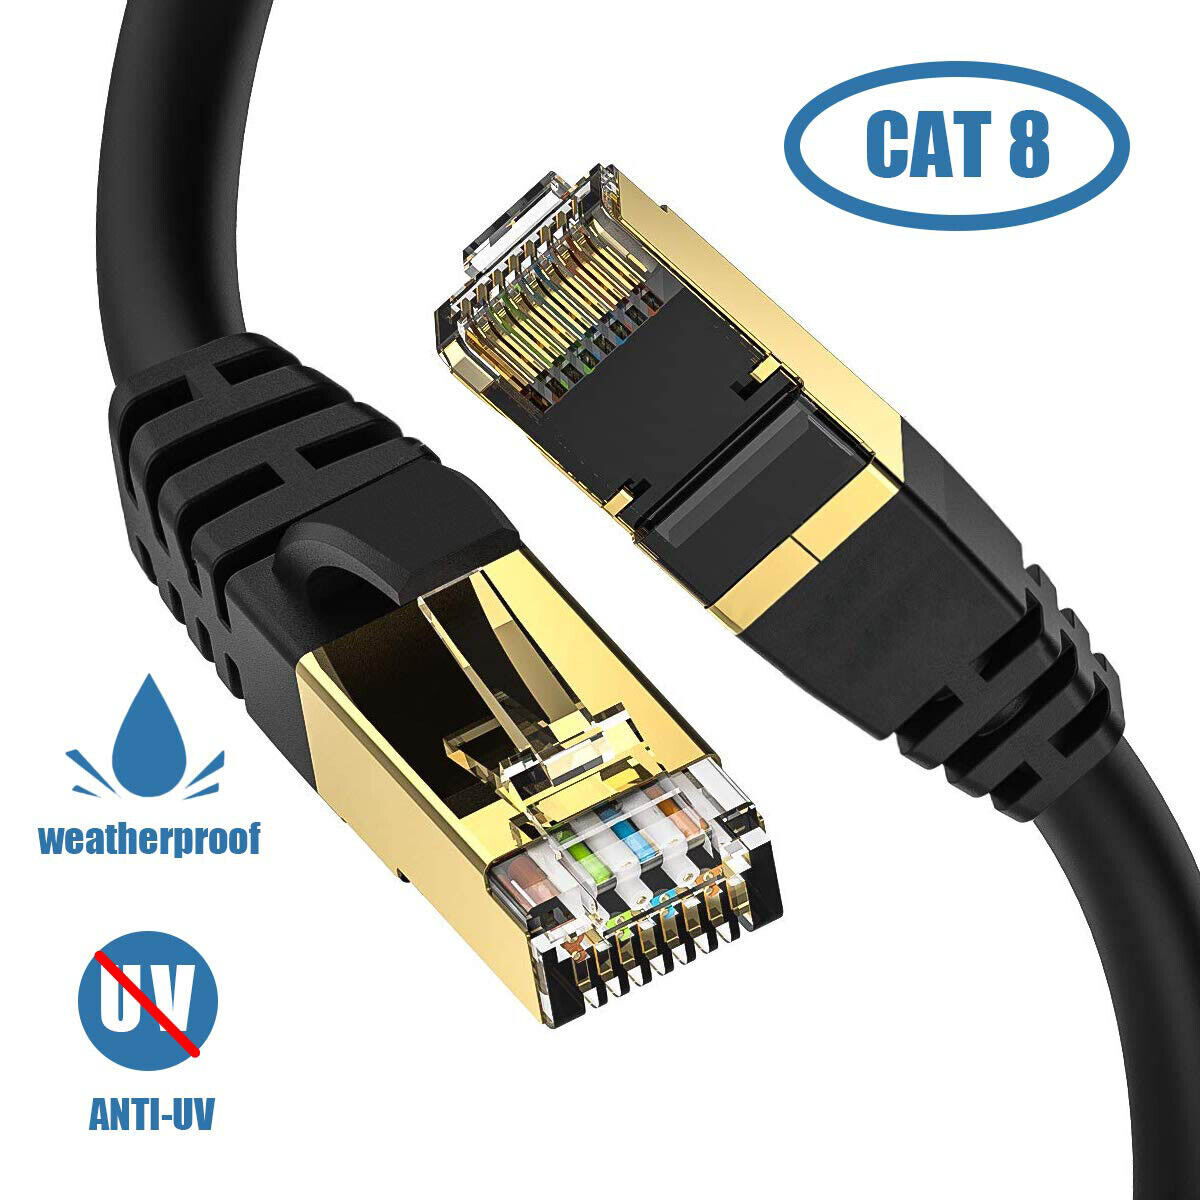 Brand-NEW 30FT Cat8 Home Office Hi-Speed Network RJ45 Ethernet Patch Cable Lot